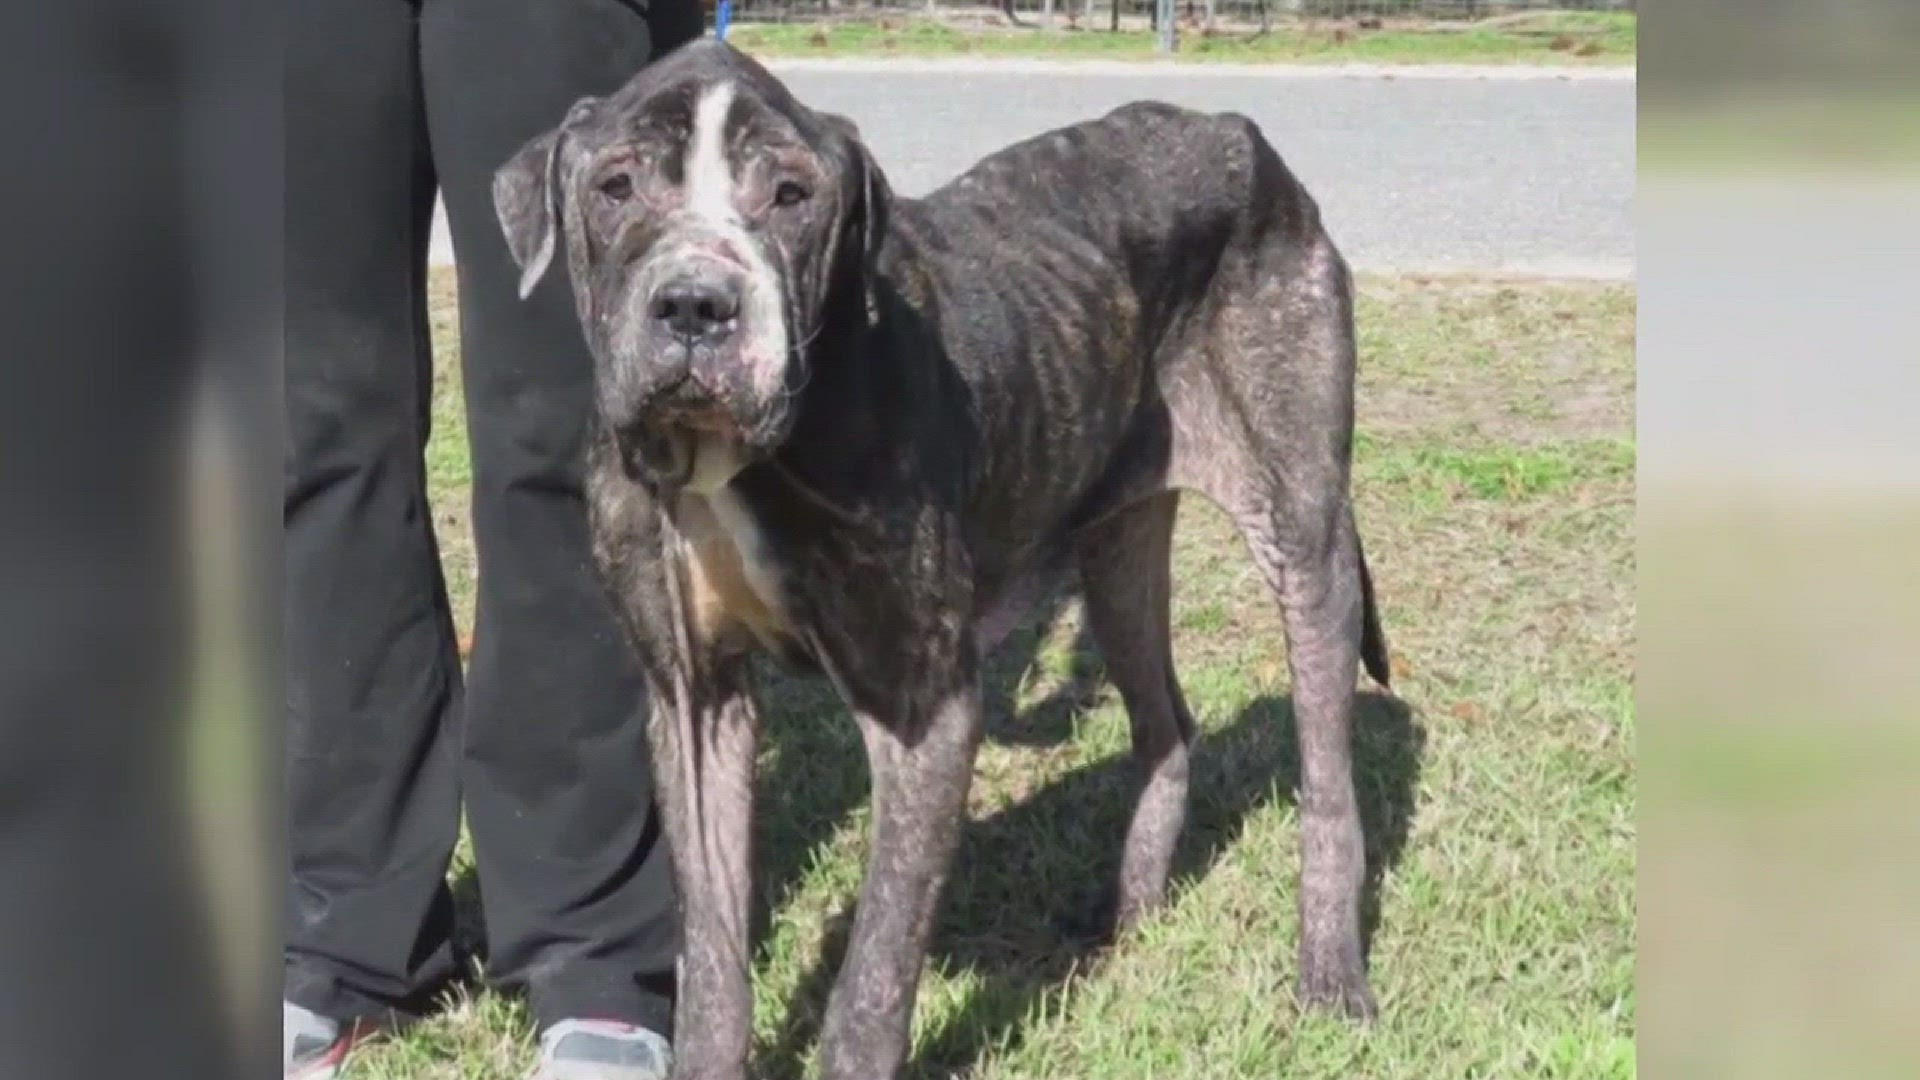 Metairie couple arrested after dogs found emaciated 